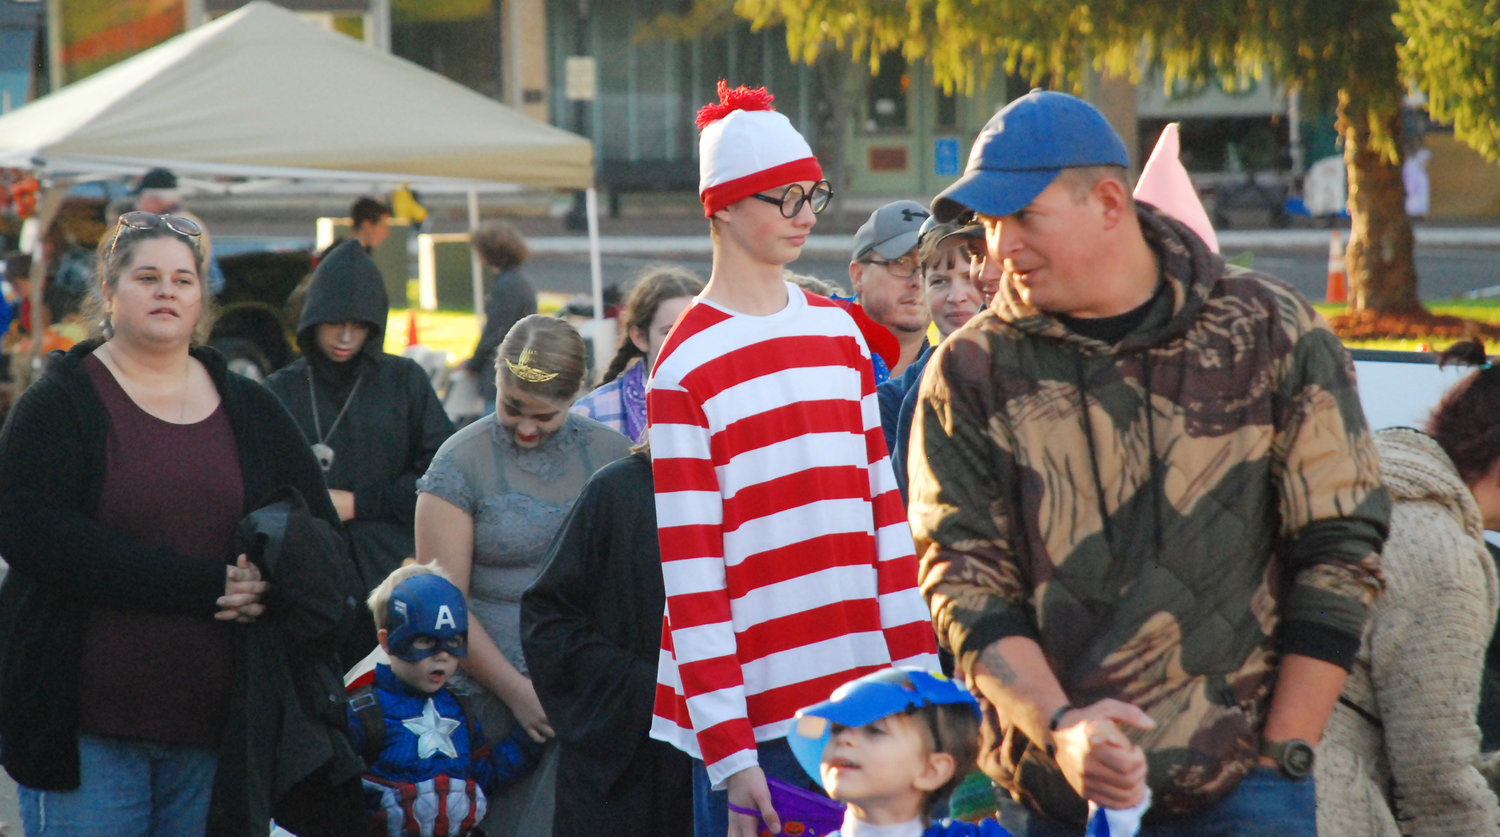 WALDO, Martin Handford’s popular character who has been hard to find since 1987, made an appearance on West Elm Street.